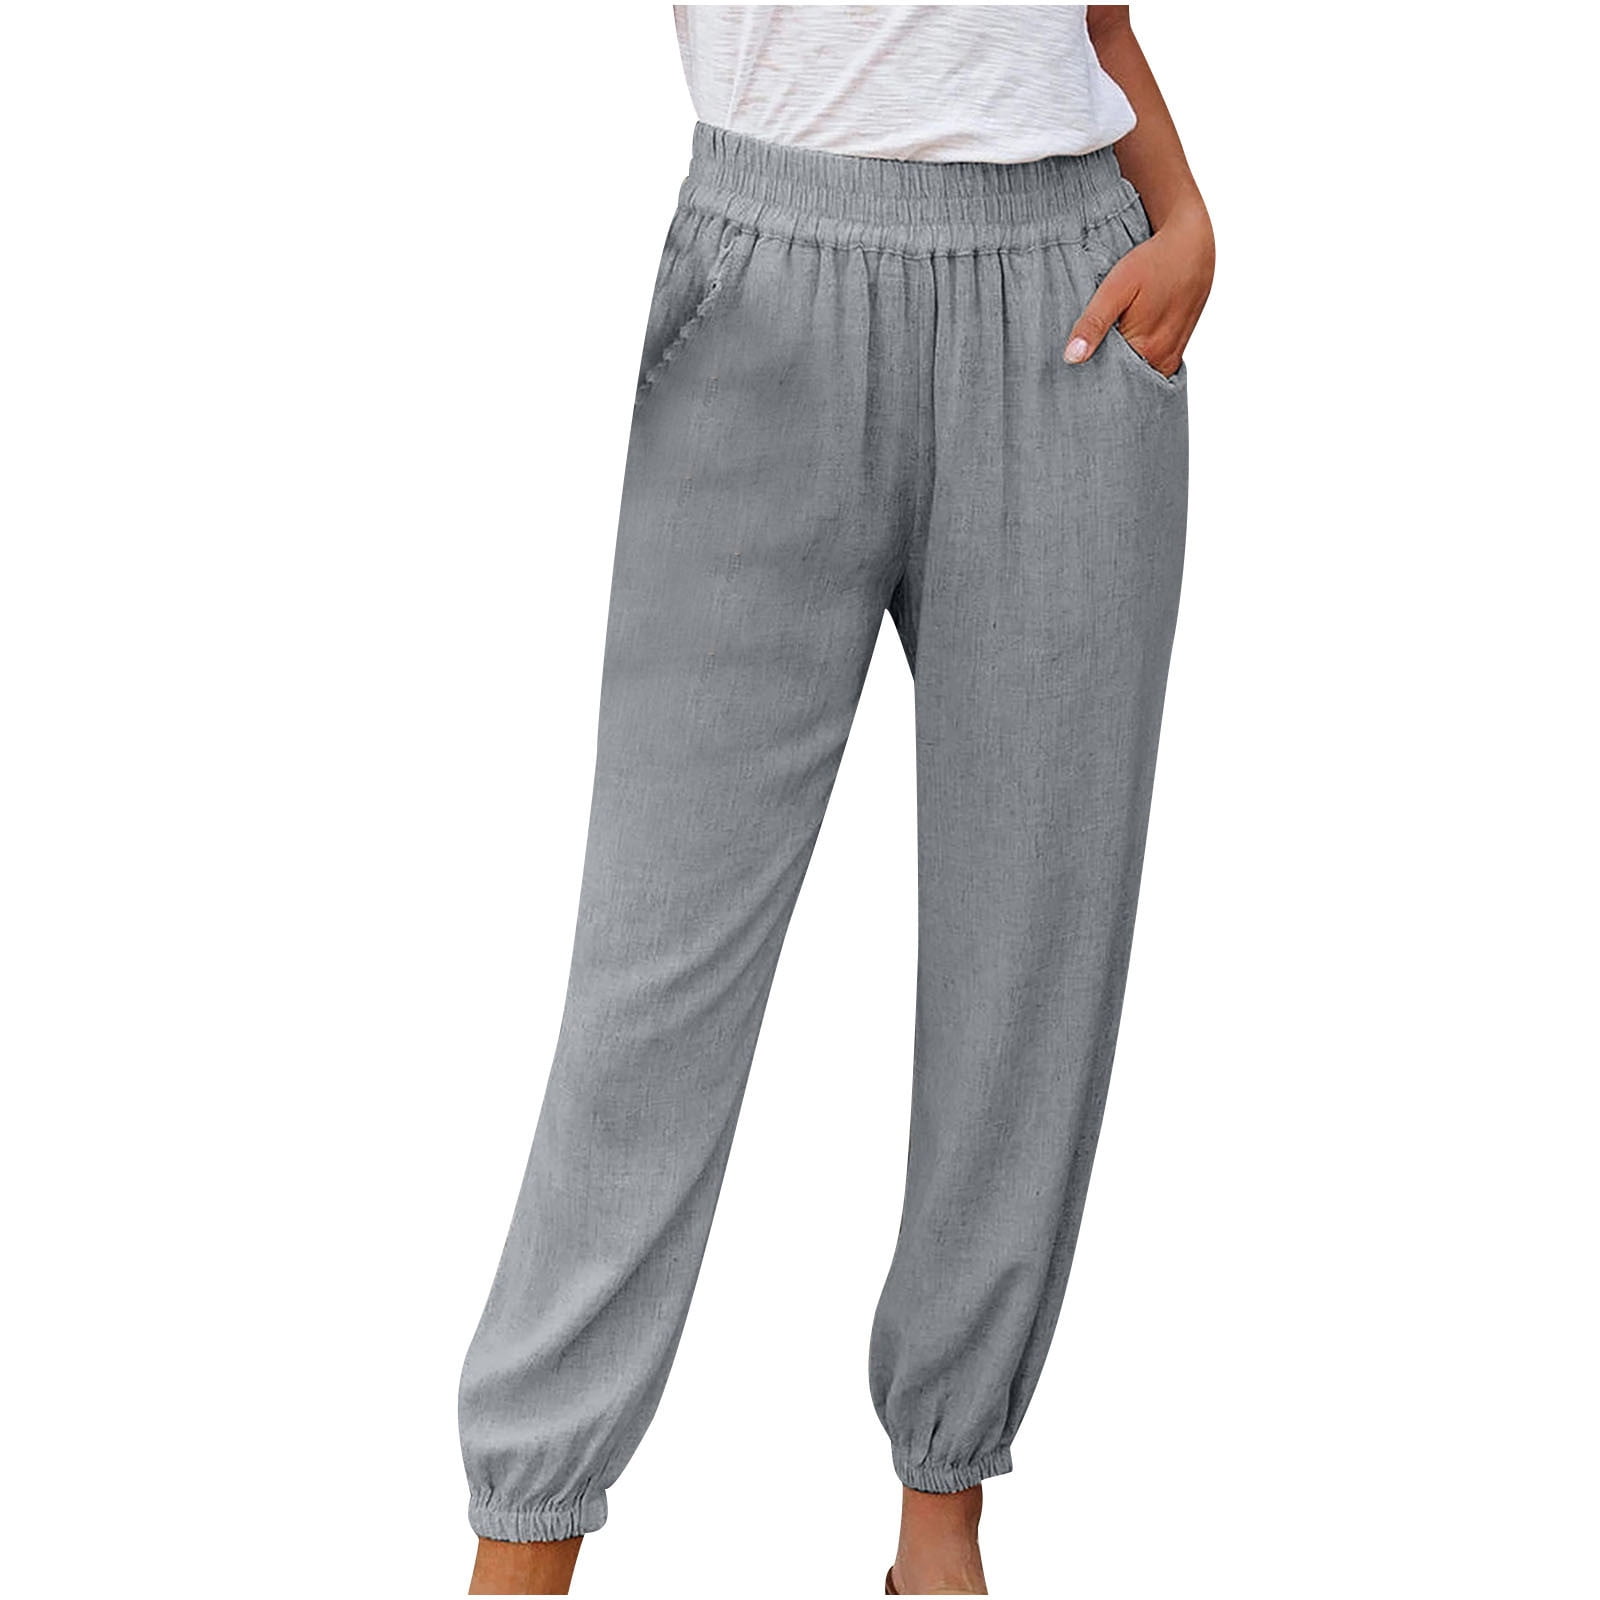 Women's Solid Activewear Jogger Pants Summer Cotton Linen Drawstring  Elastic Waist Pockets Trousers Tapered Sweatpants